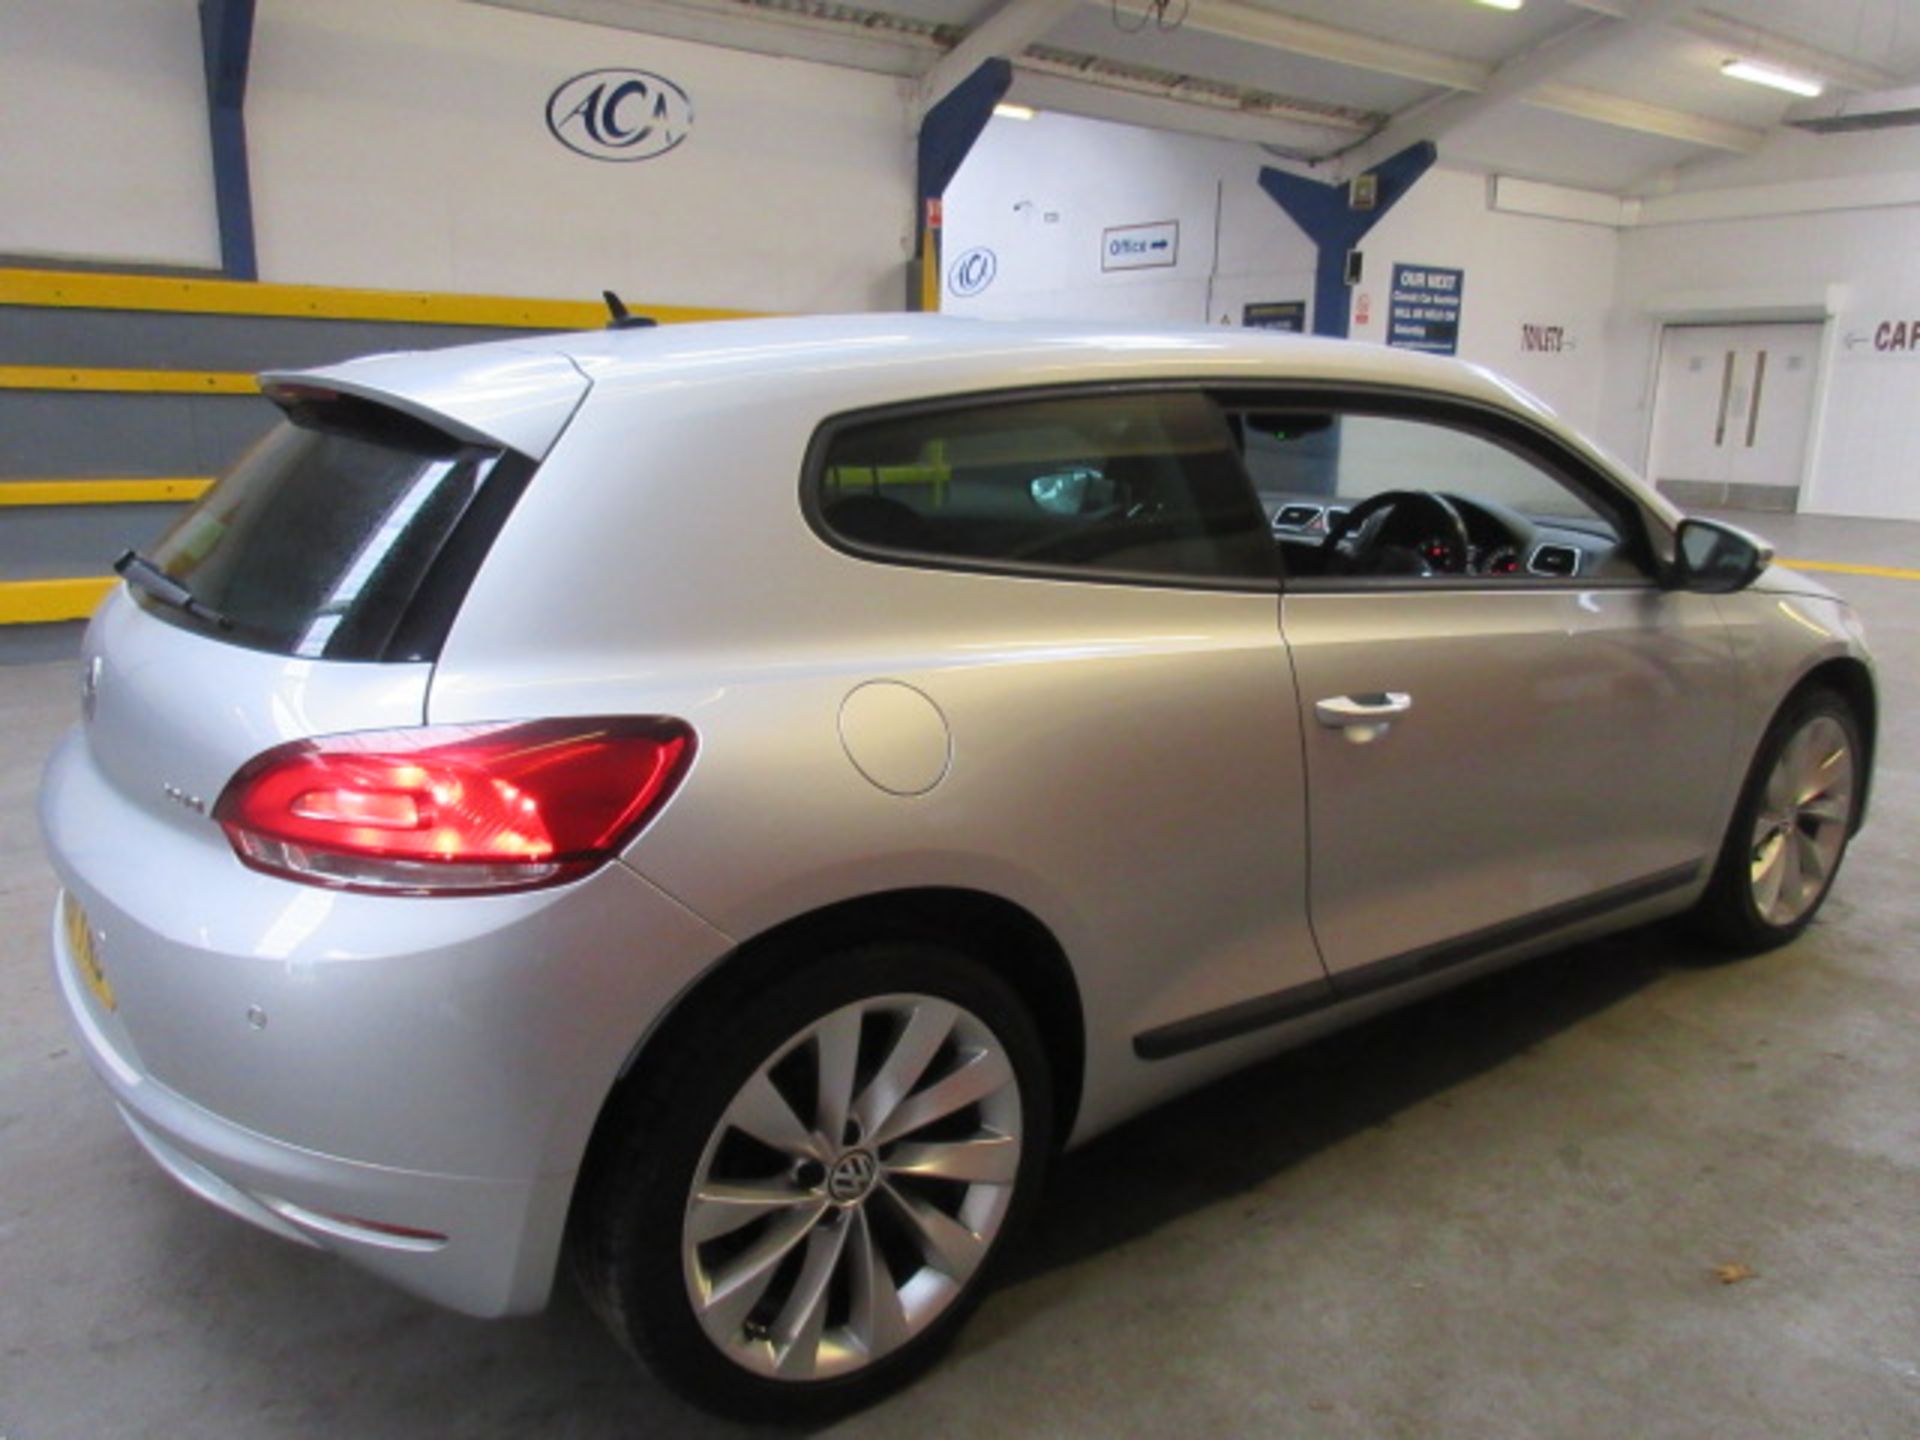 61 11 VW Scirocco GT TDi 170 - Image 4 of 21